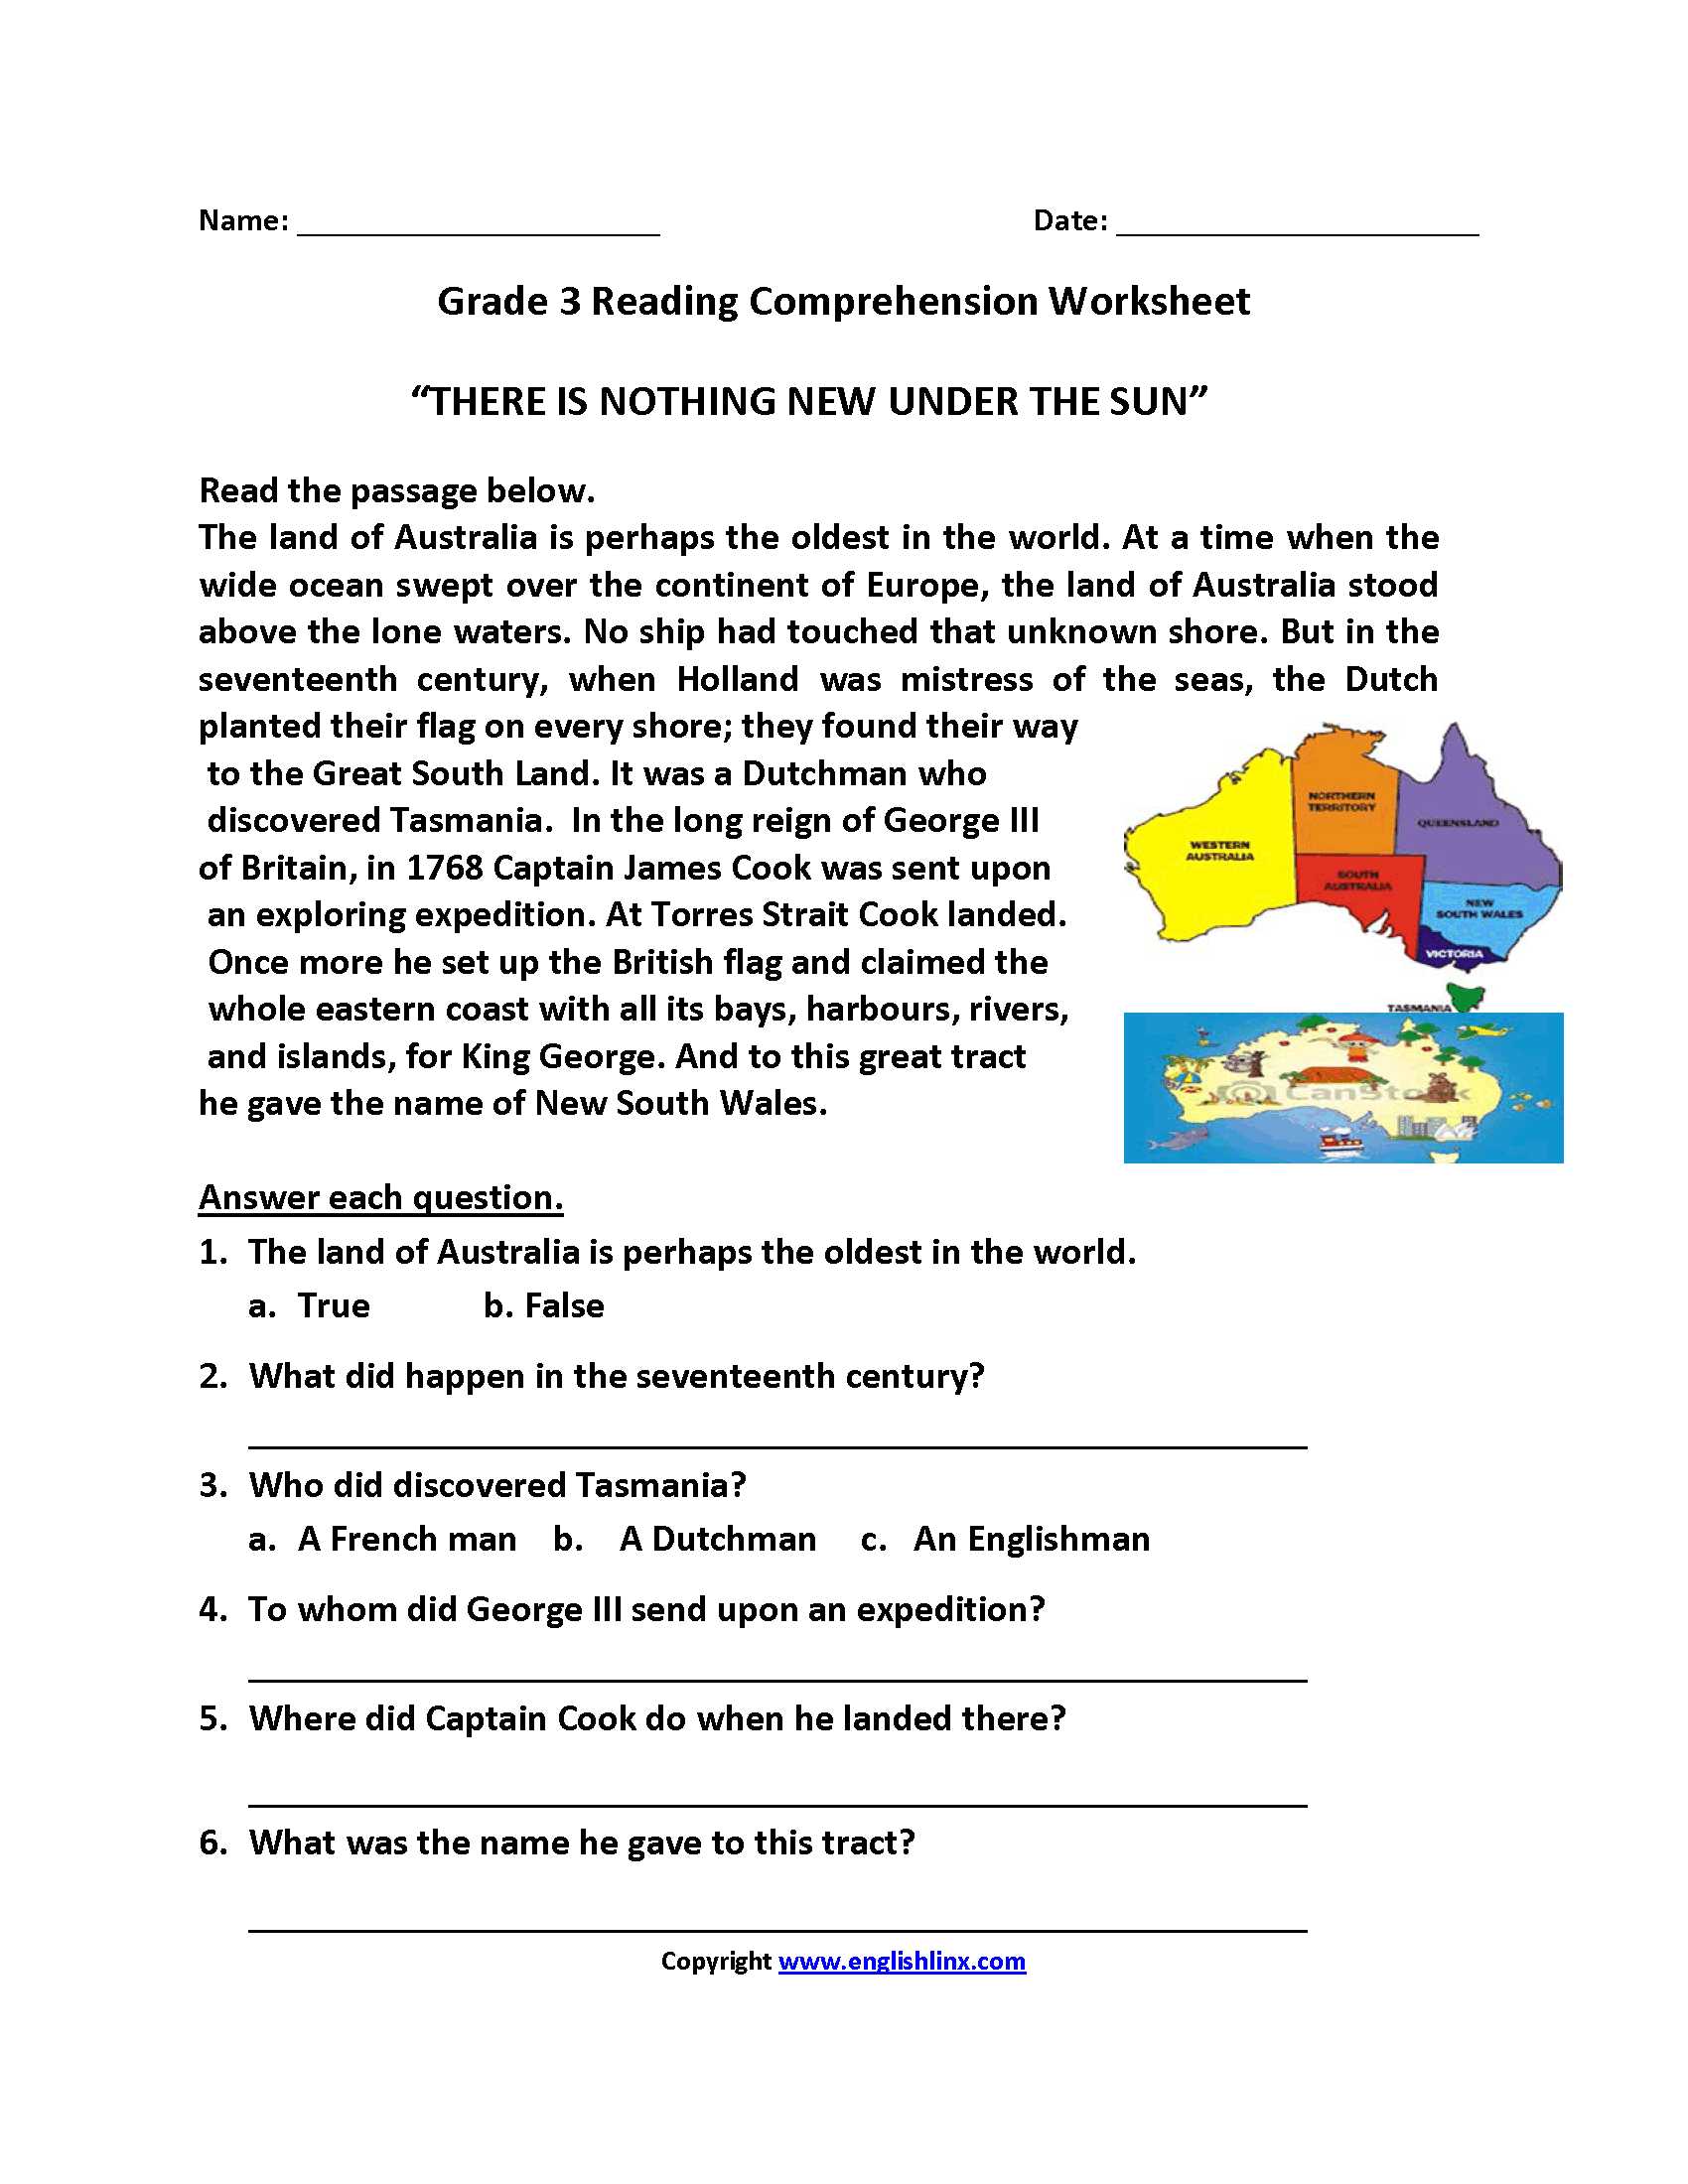 Free Comprehension Worksheets as Well as Nothing New Under Sun Third Grade Reading Worksheets